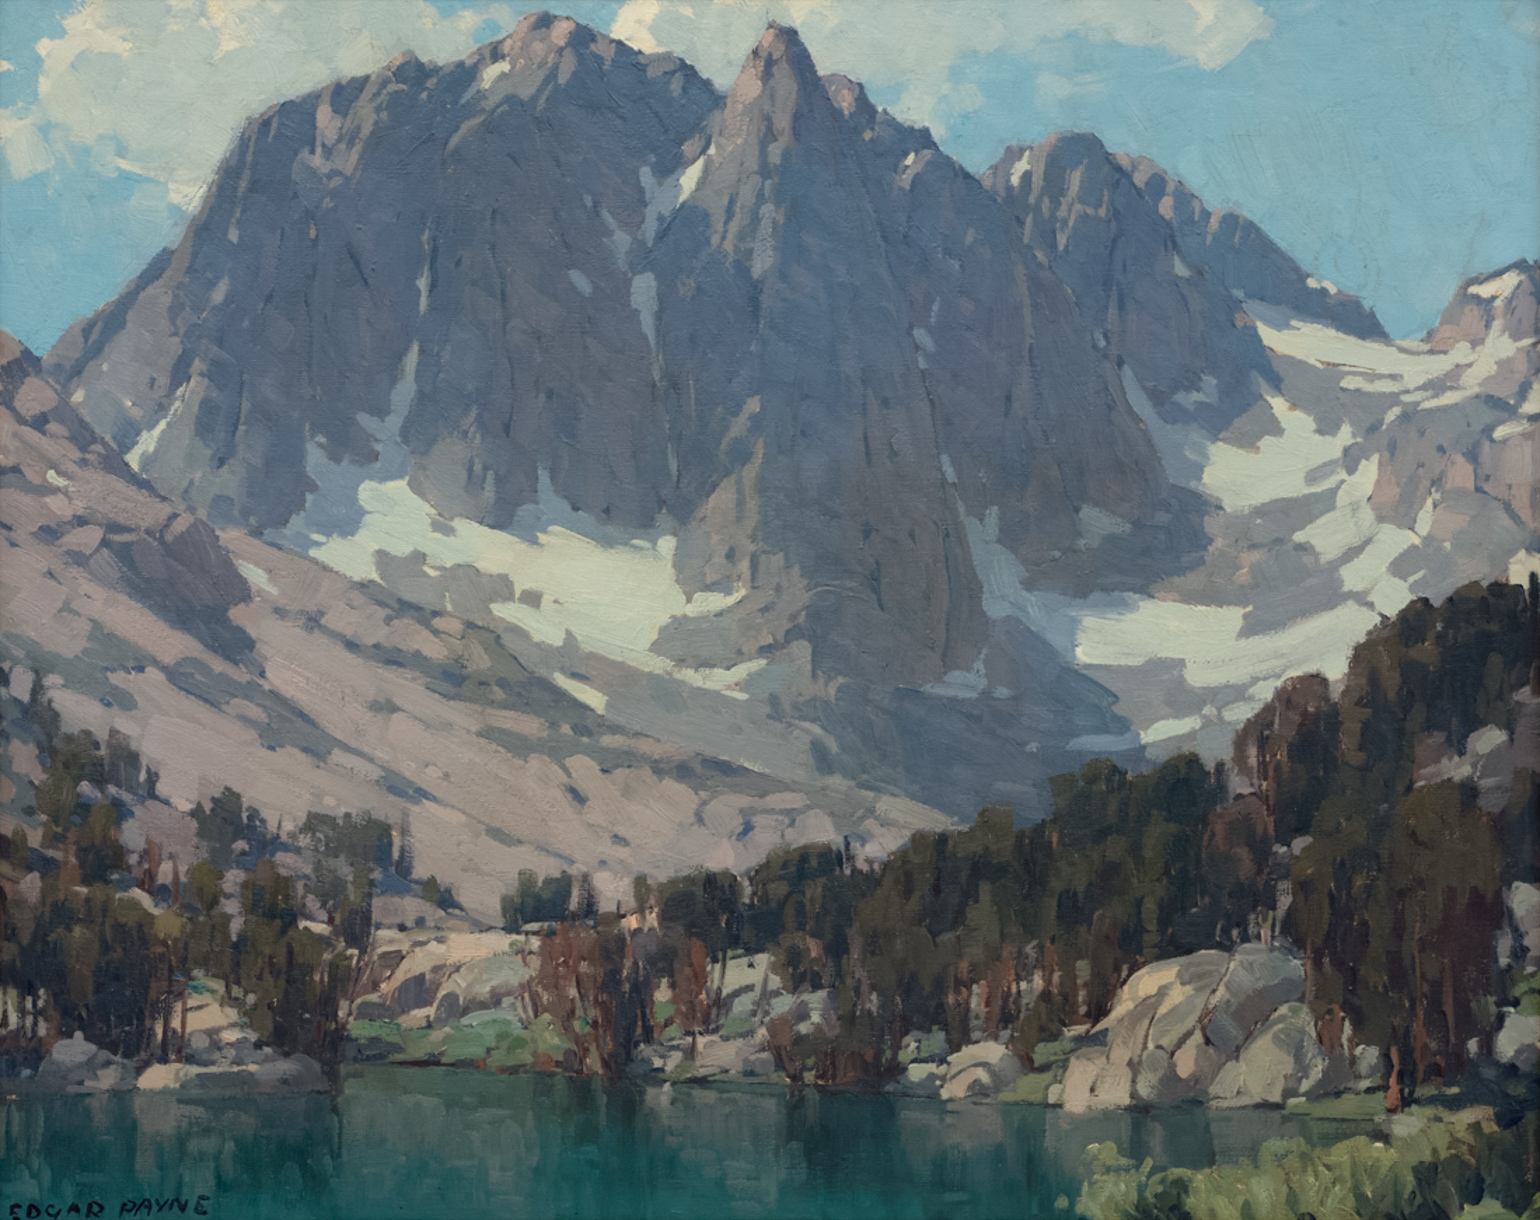 painting with snowy mountains in background and a body of water surrounded by rocks and trees in the foreground